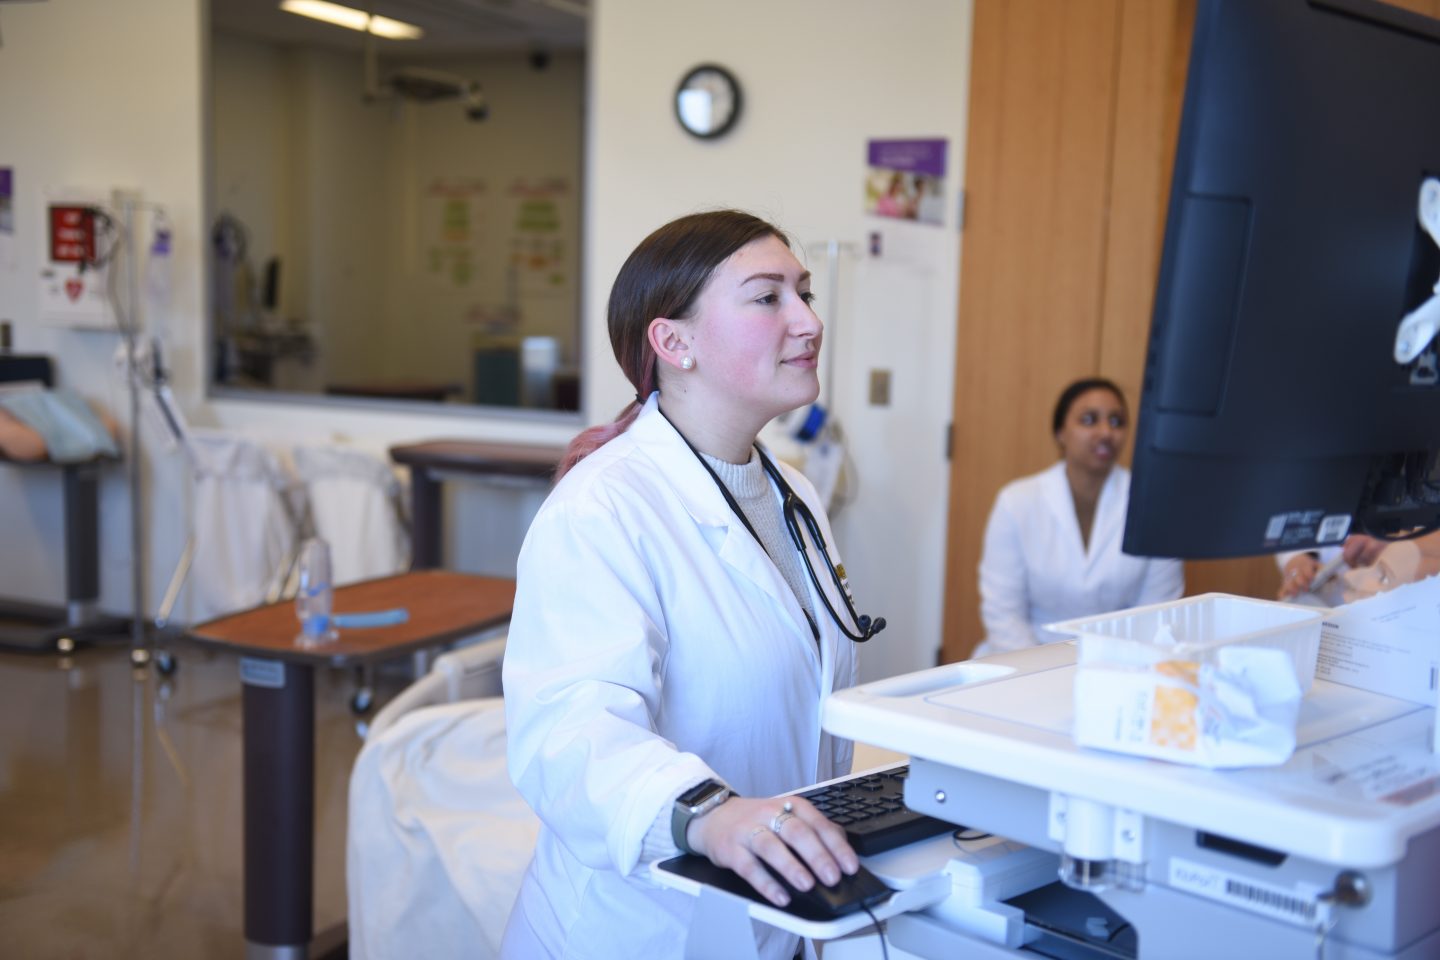 By practicing their clinical skills in a realistic hospital setting and learning how to safely and accurately administer medications, nursing students become well prepared for their first RN jobs.